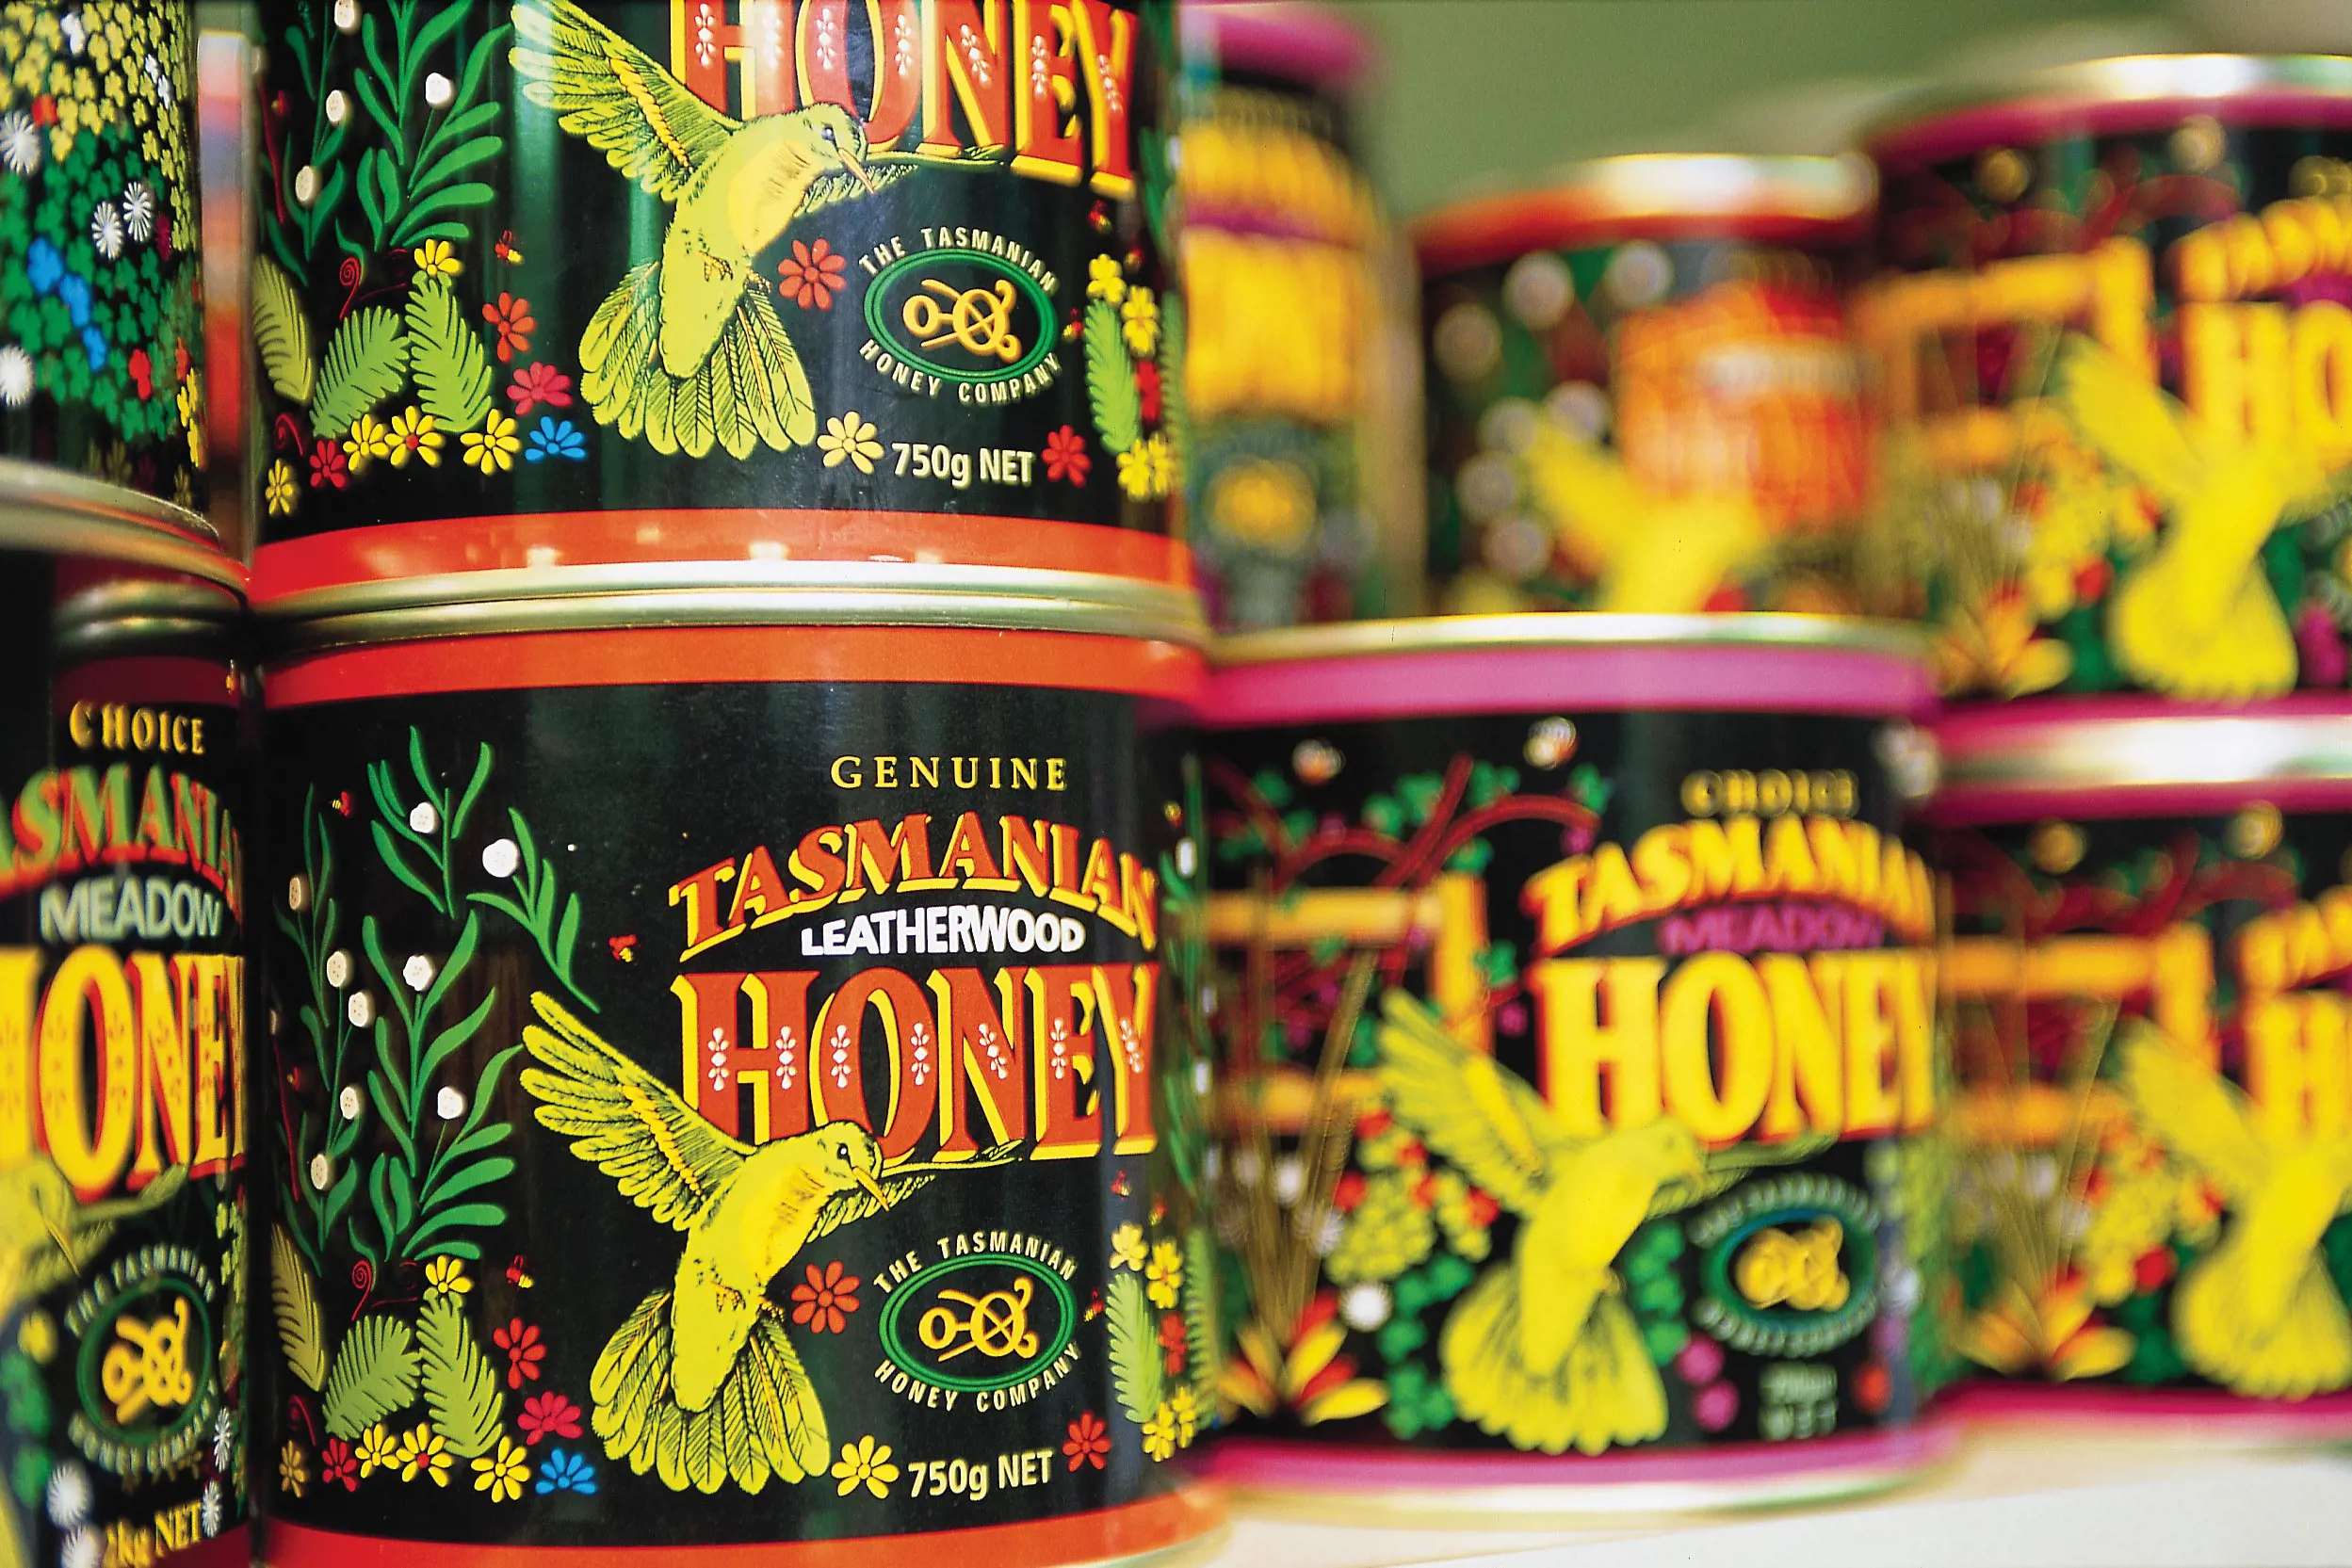 Close up of Tasmanian Honey Company products on shelf. Packaging is black with colourful bird and flower decoration.